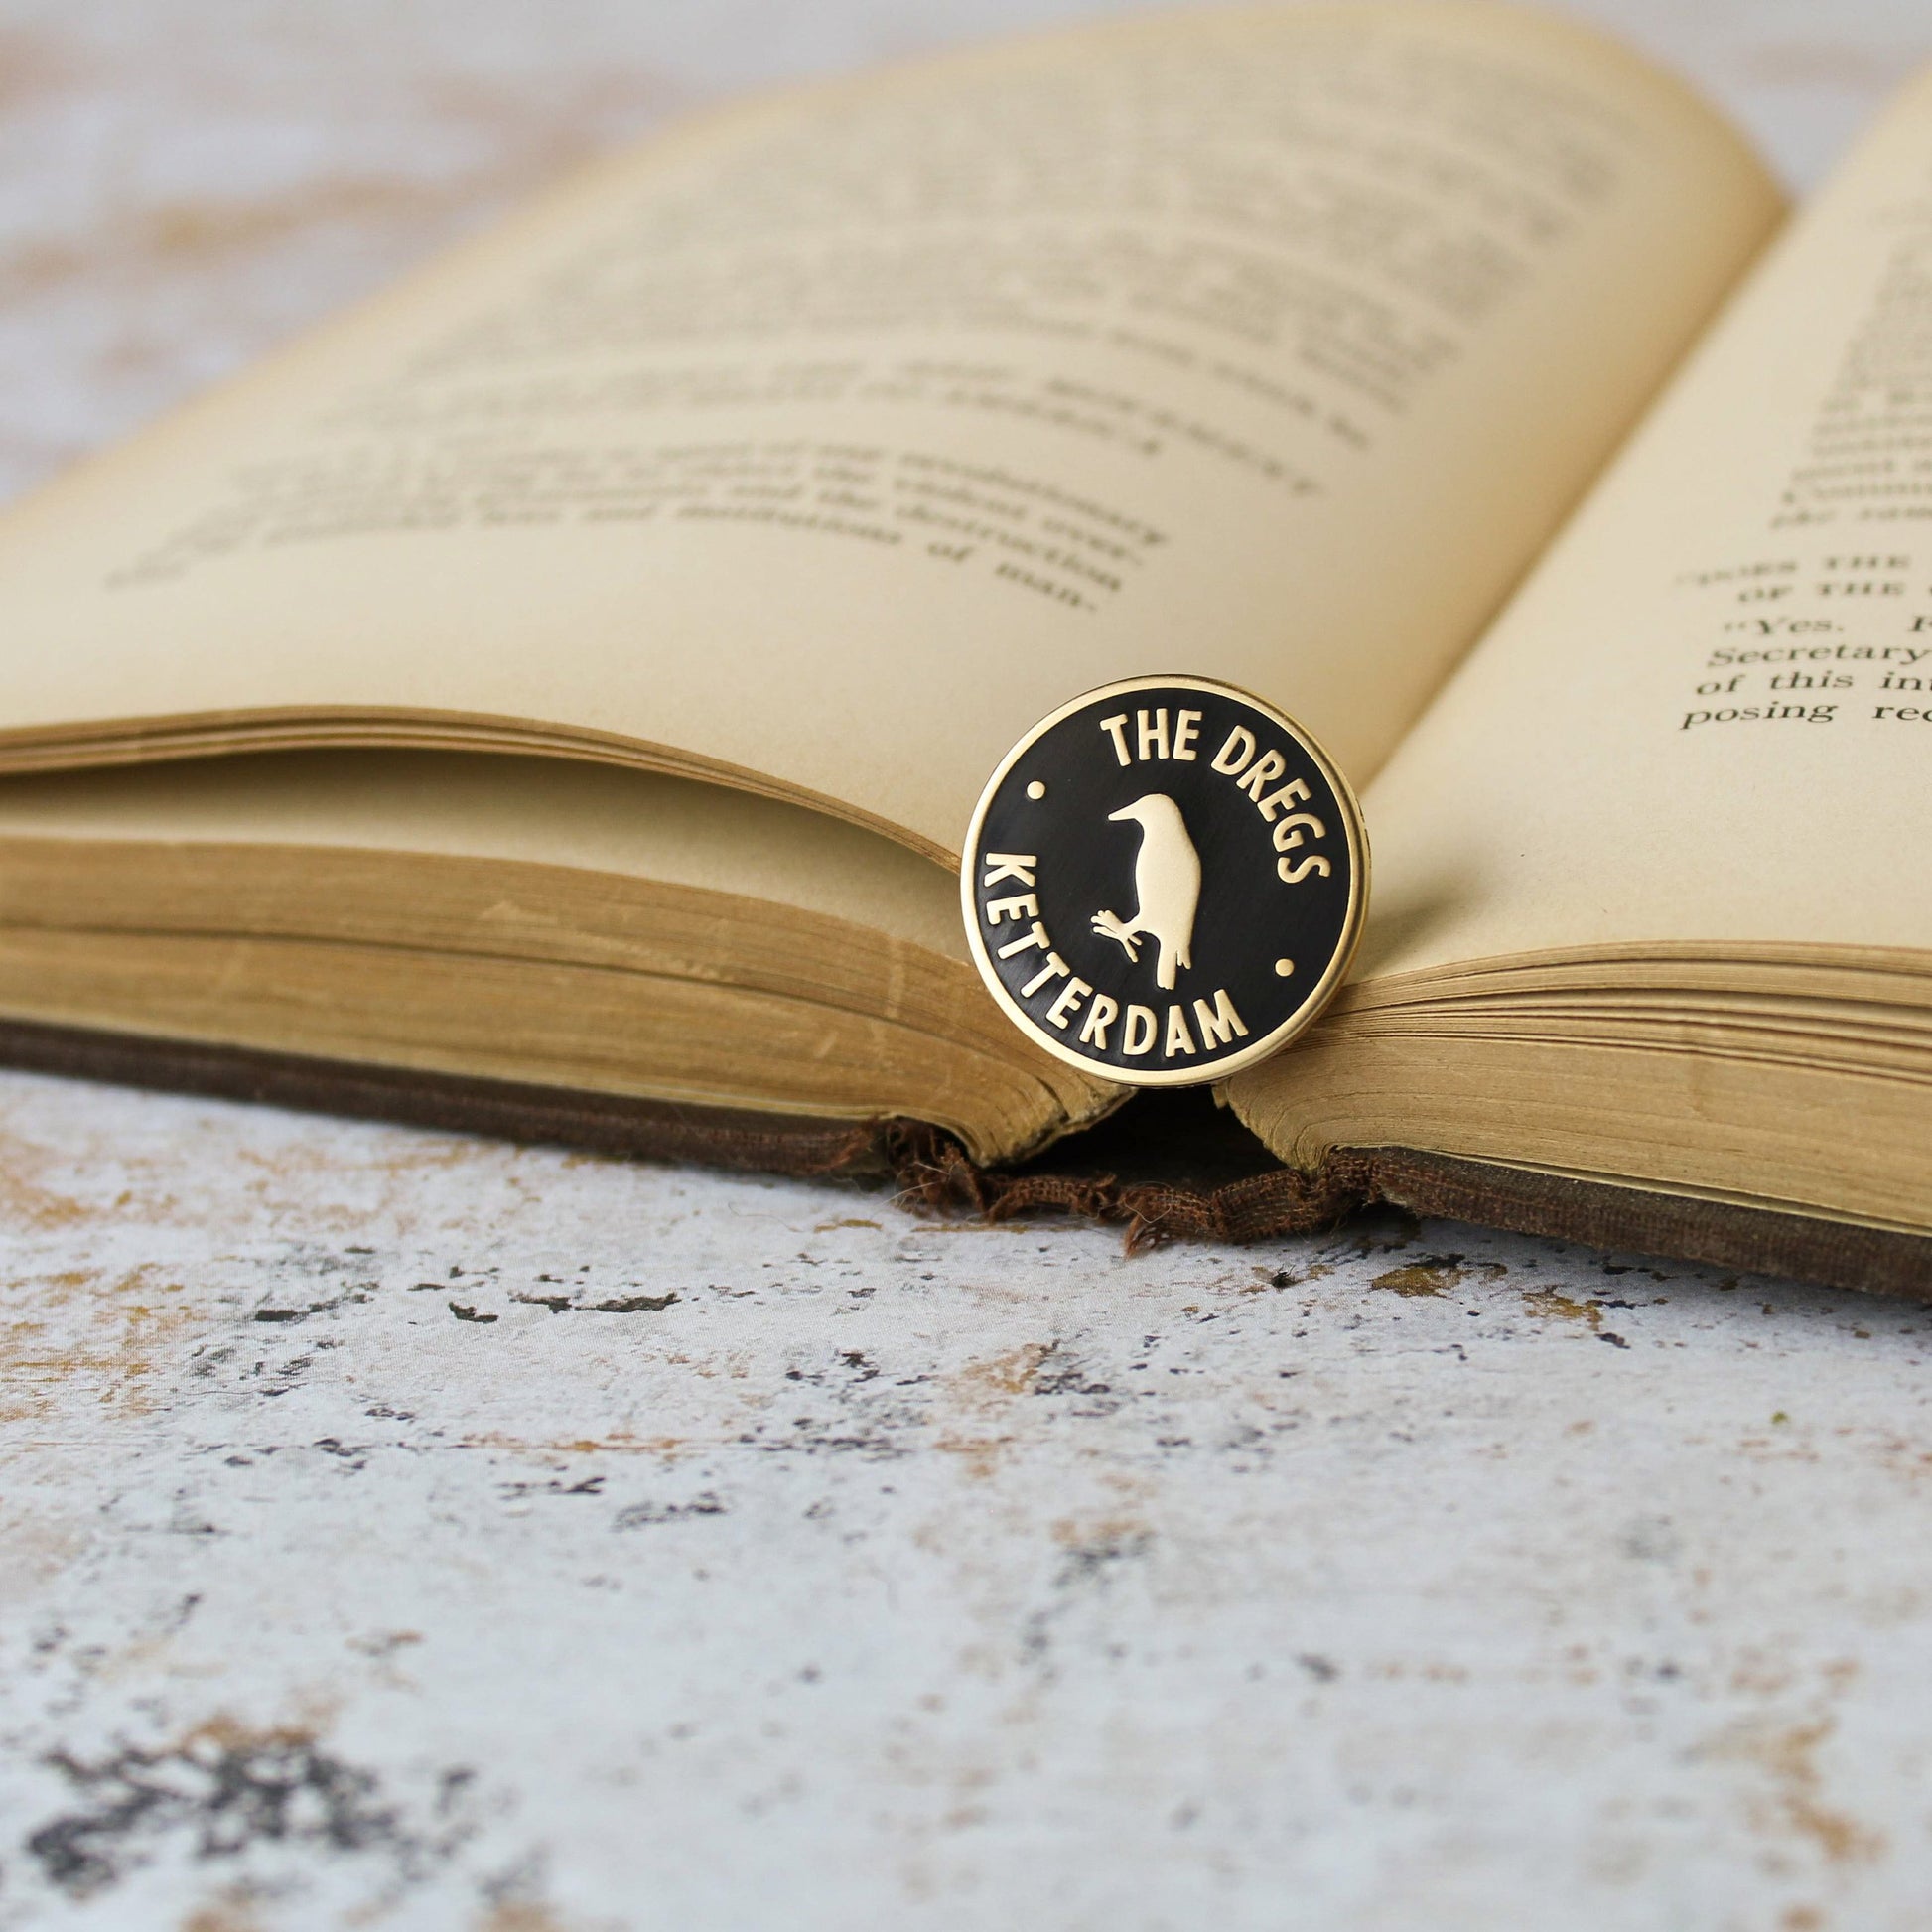 Black and matte gold crow inside a circle dregs membership style enamel pin on an open book